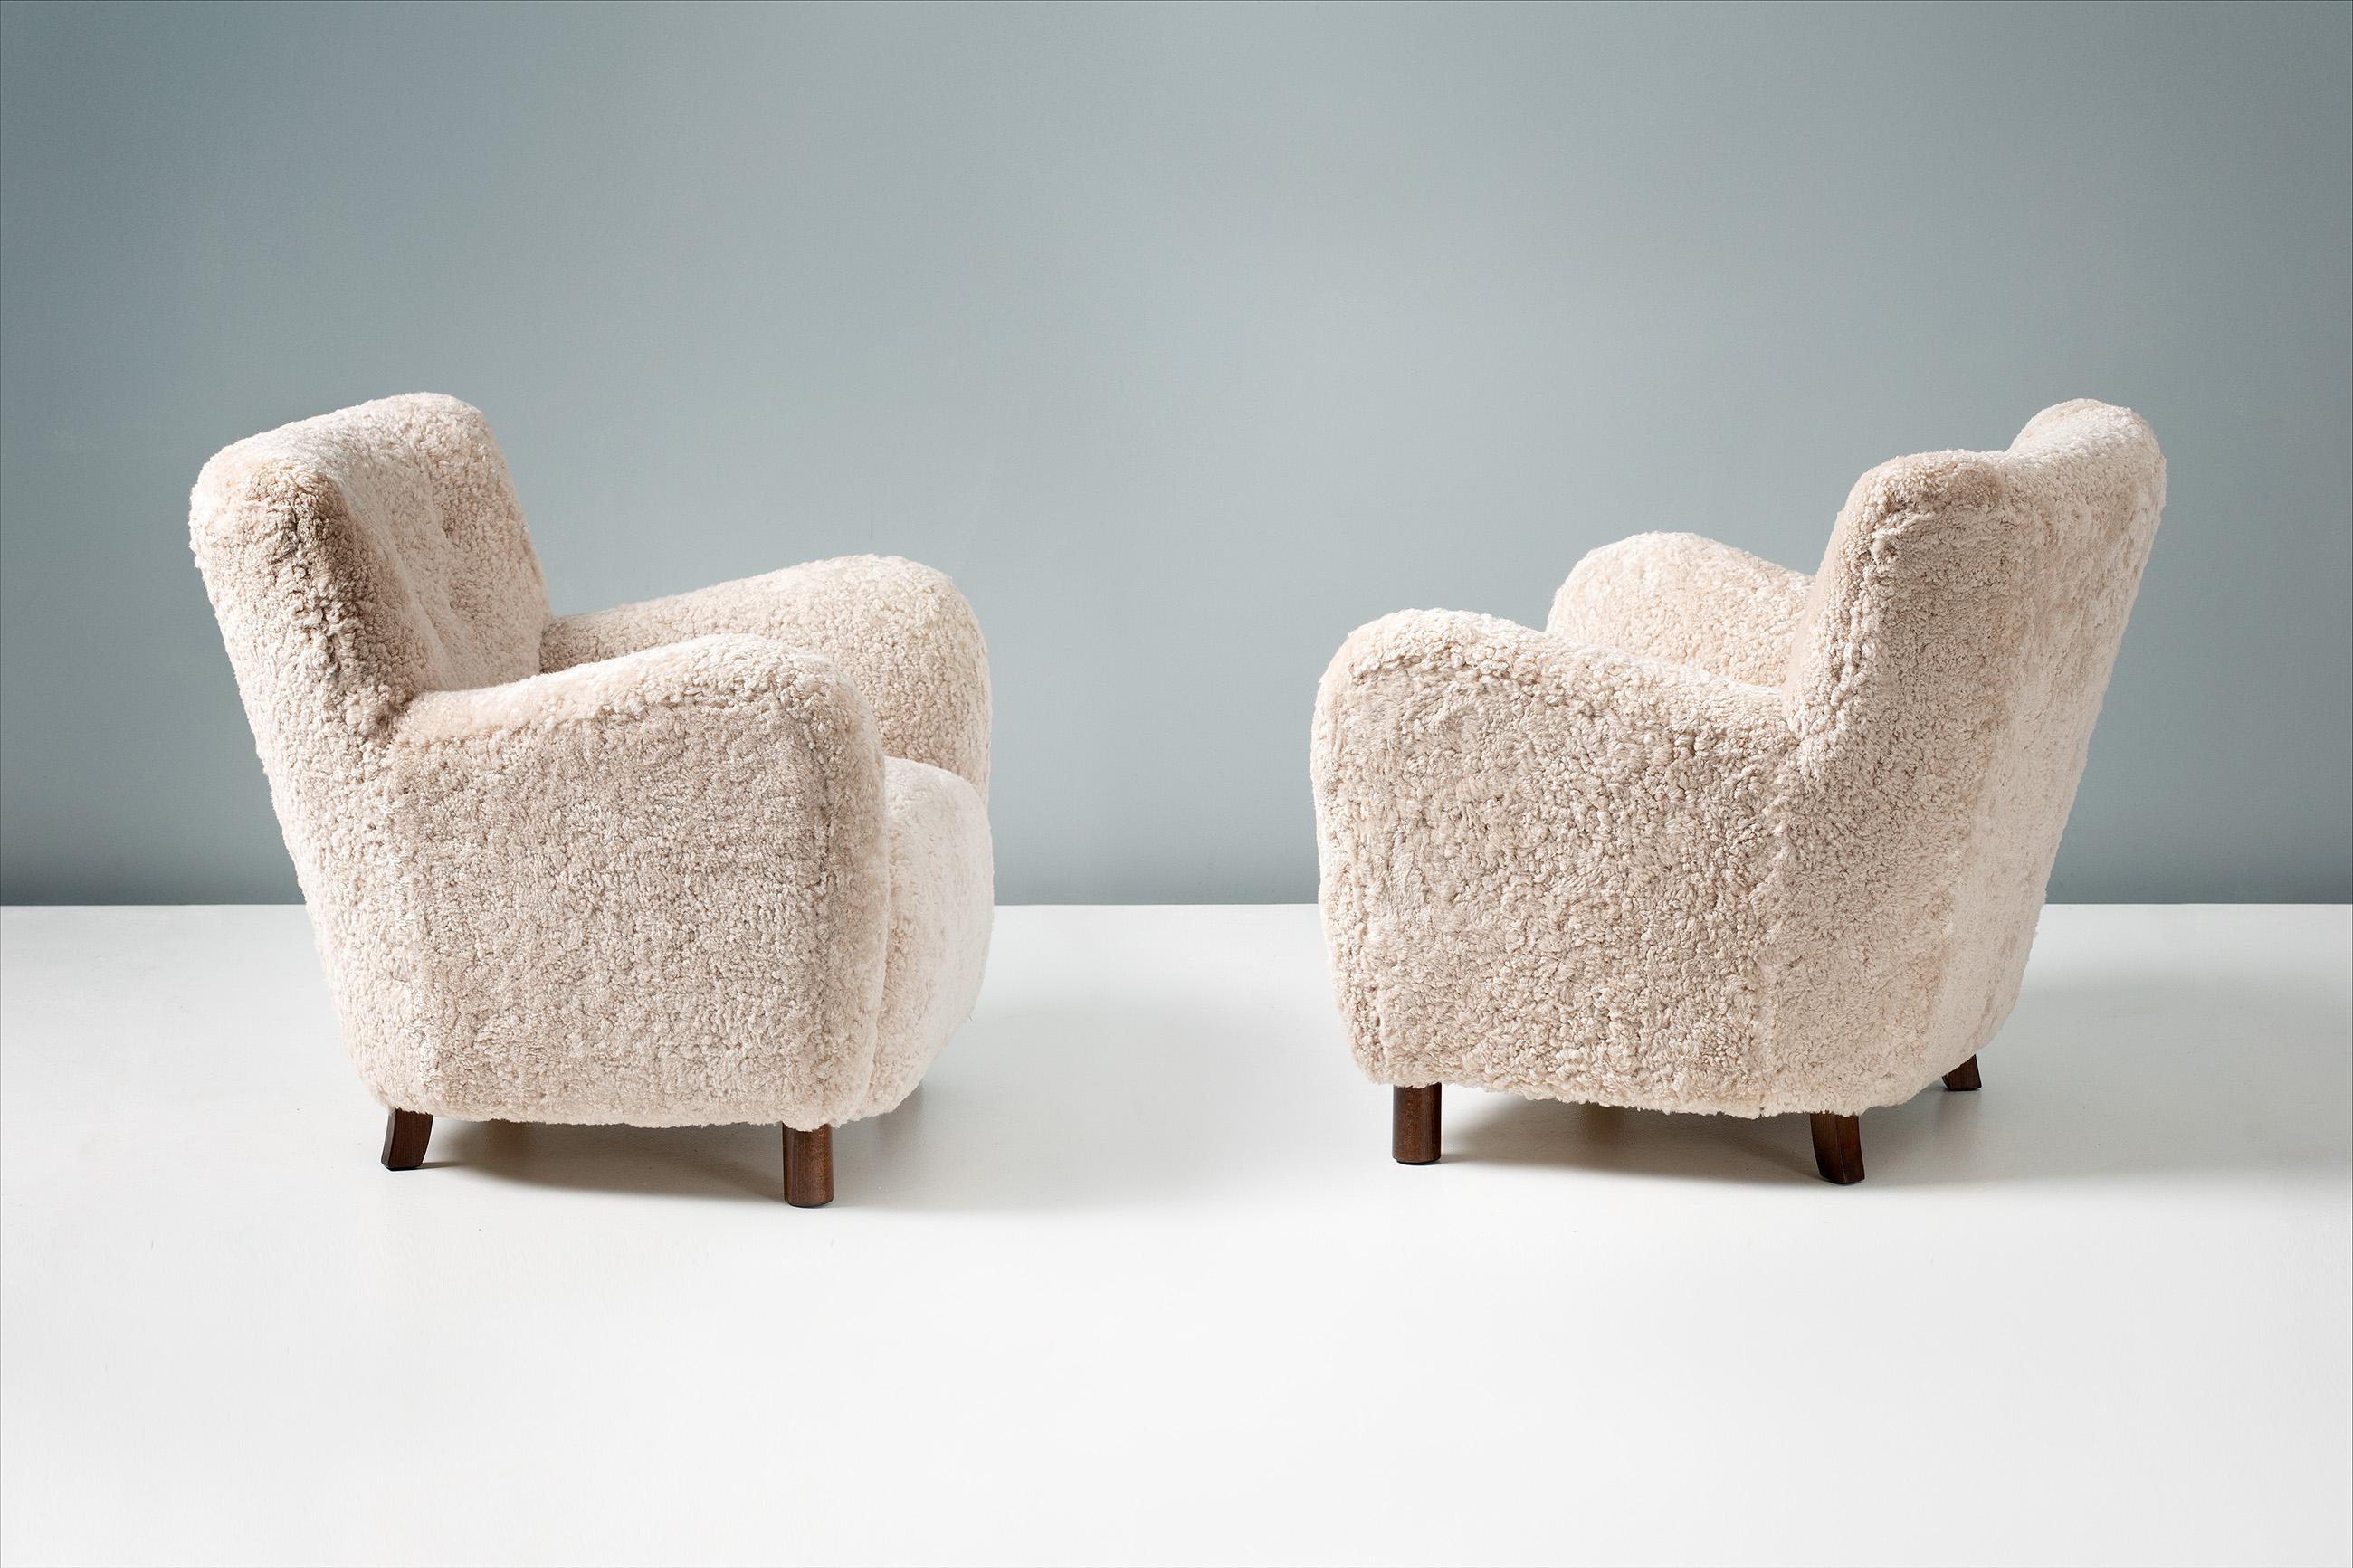 Dagmar design

Model 54 lounge chair

A pair of custom made lounge chairs developed and produced at our workshops in London using the highest quality materials. These examples are upholstered in ‘Moonlight’ shearling and feature stained beech